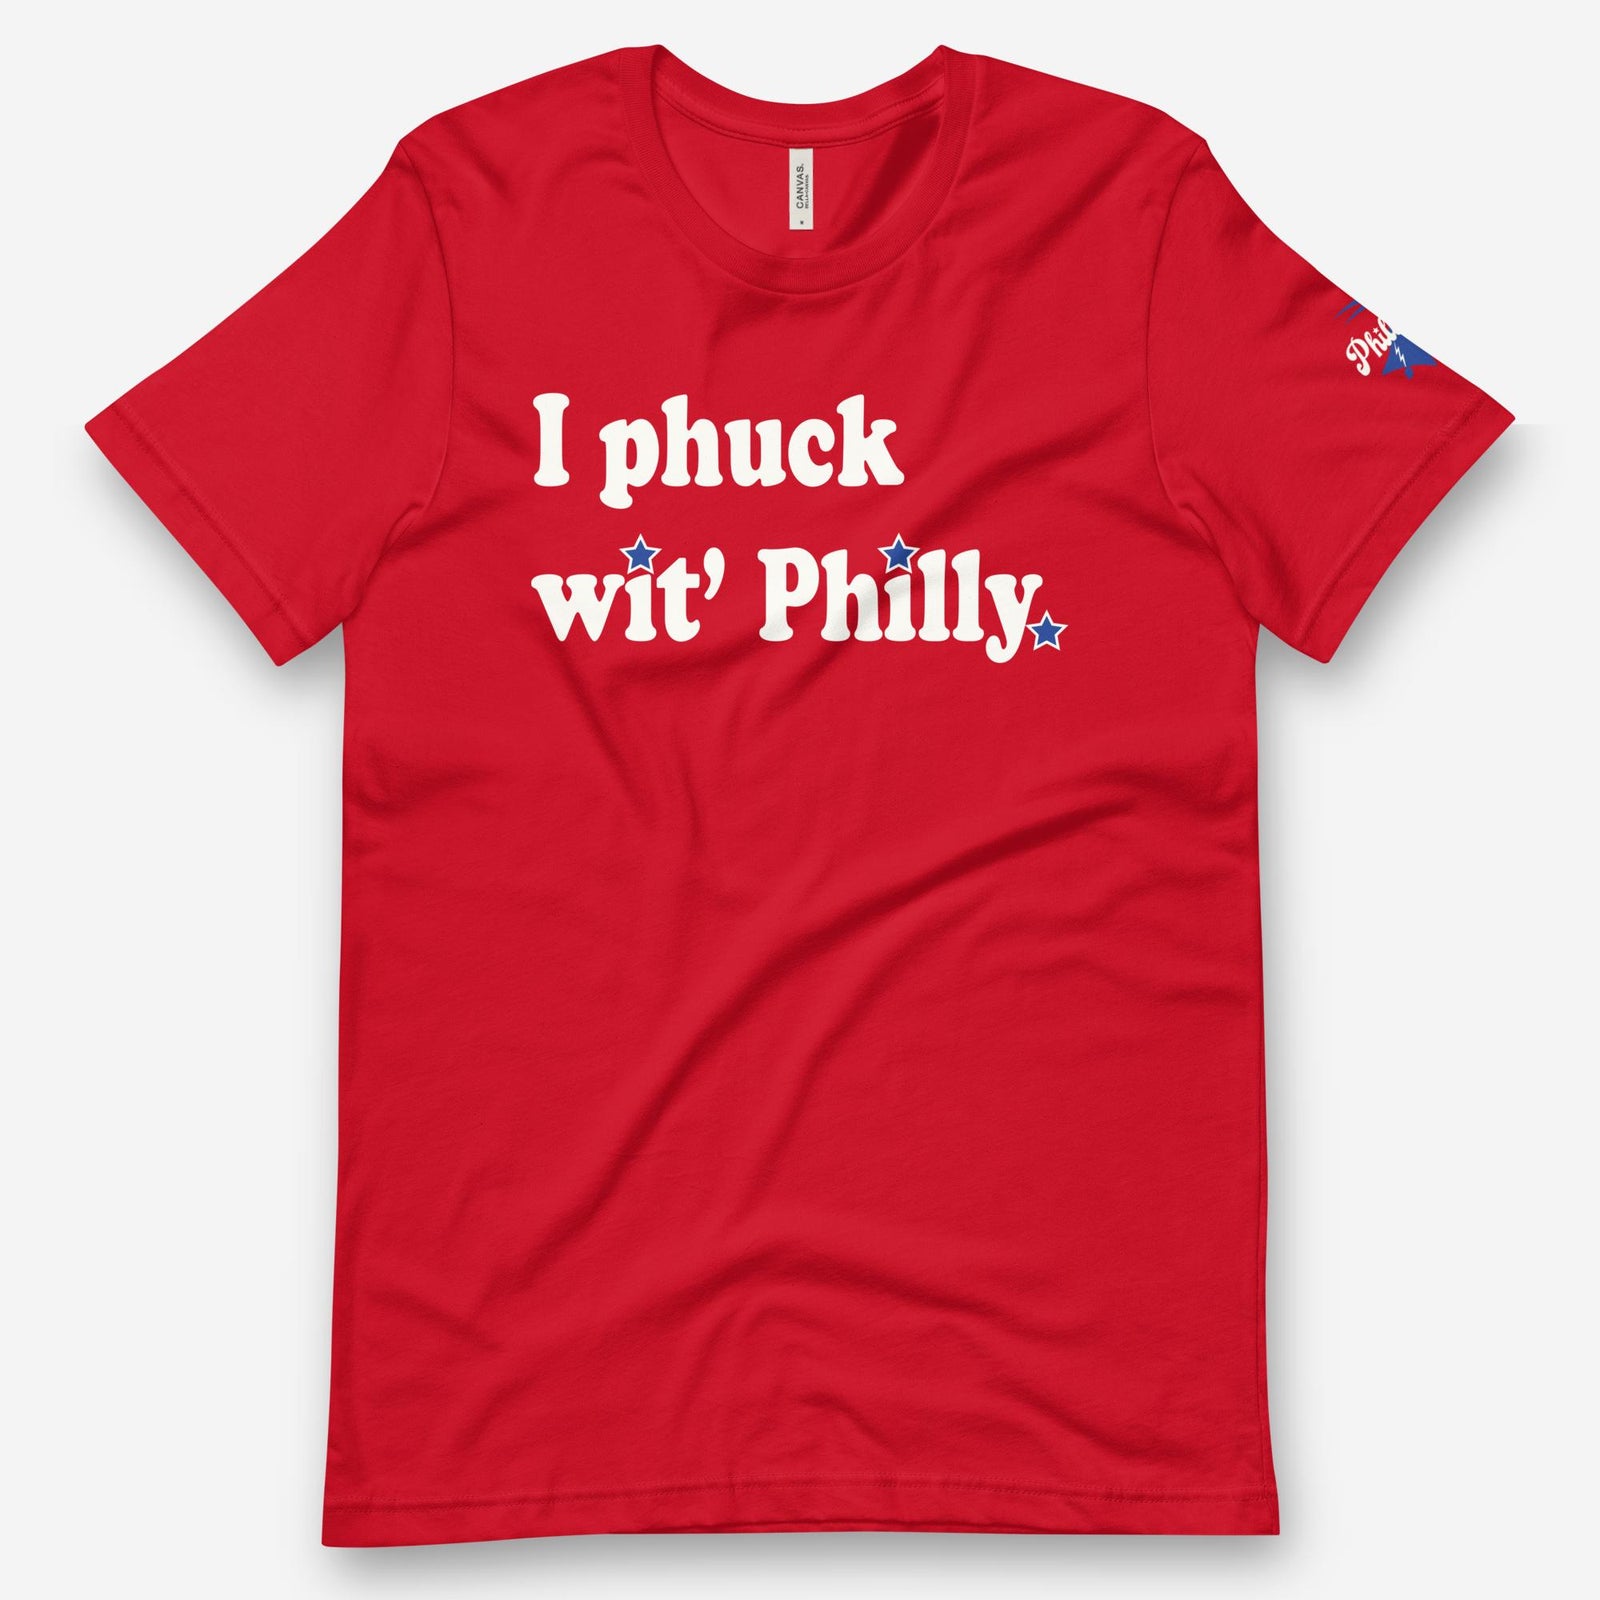 "I Phuck wit' Philly" Tee